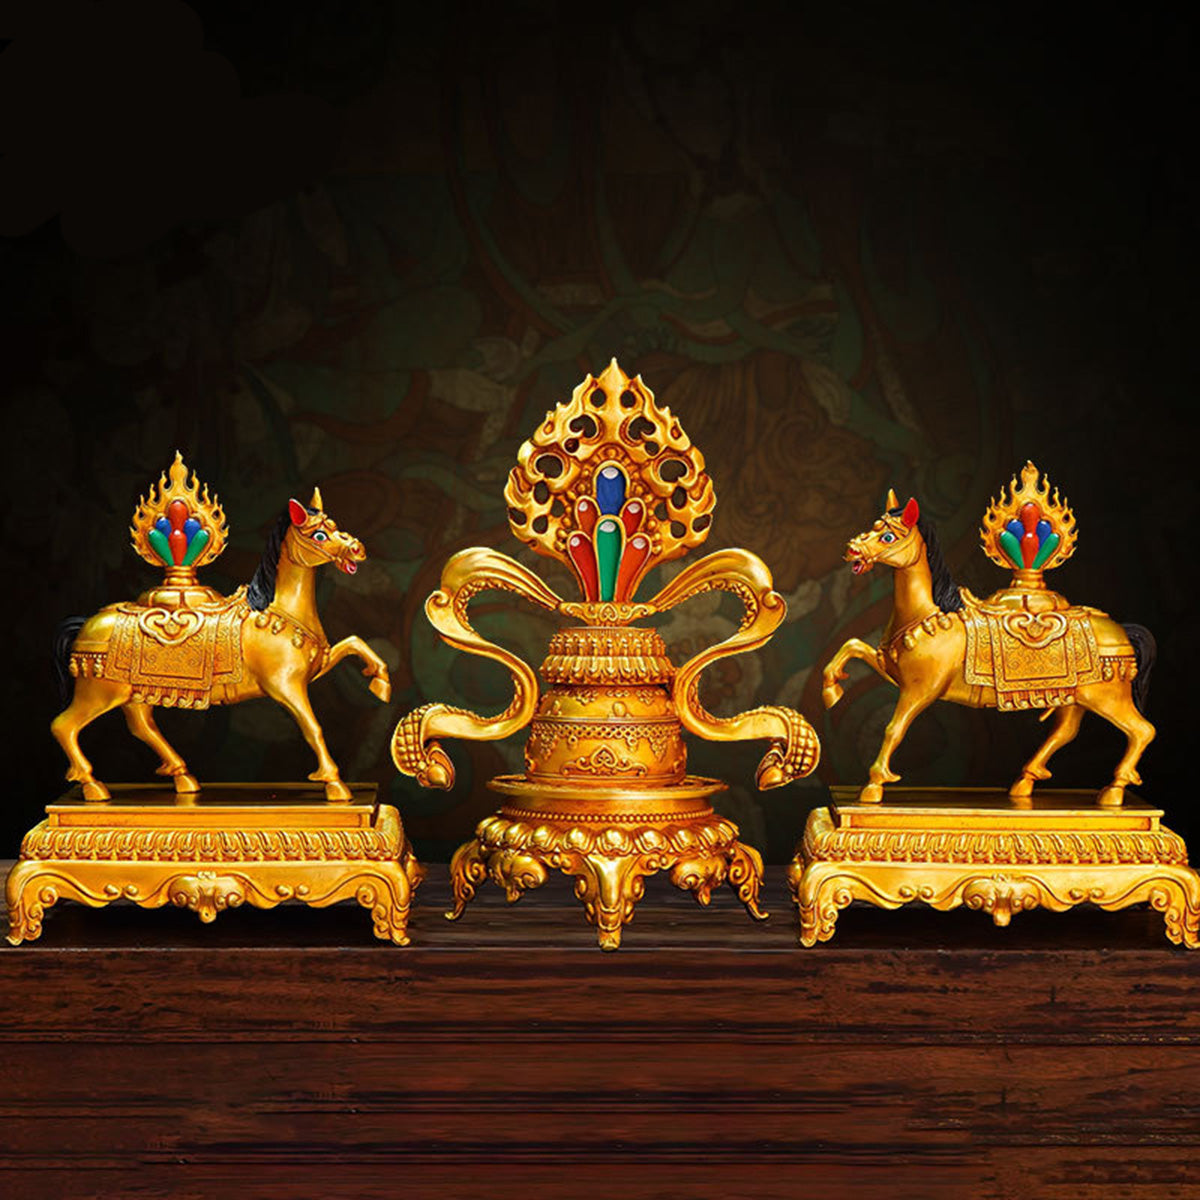 Double Deer Gold Wheel & Monibao Bronze gilt Carved and painted Tibetan Wheel-turning King Seven treasures Home Buddhist hall offering